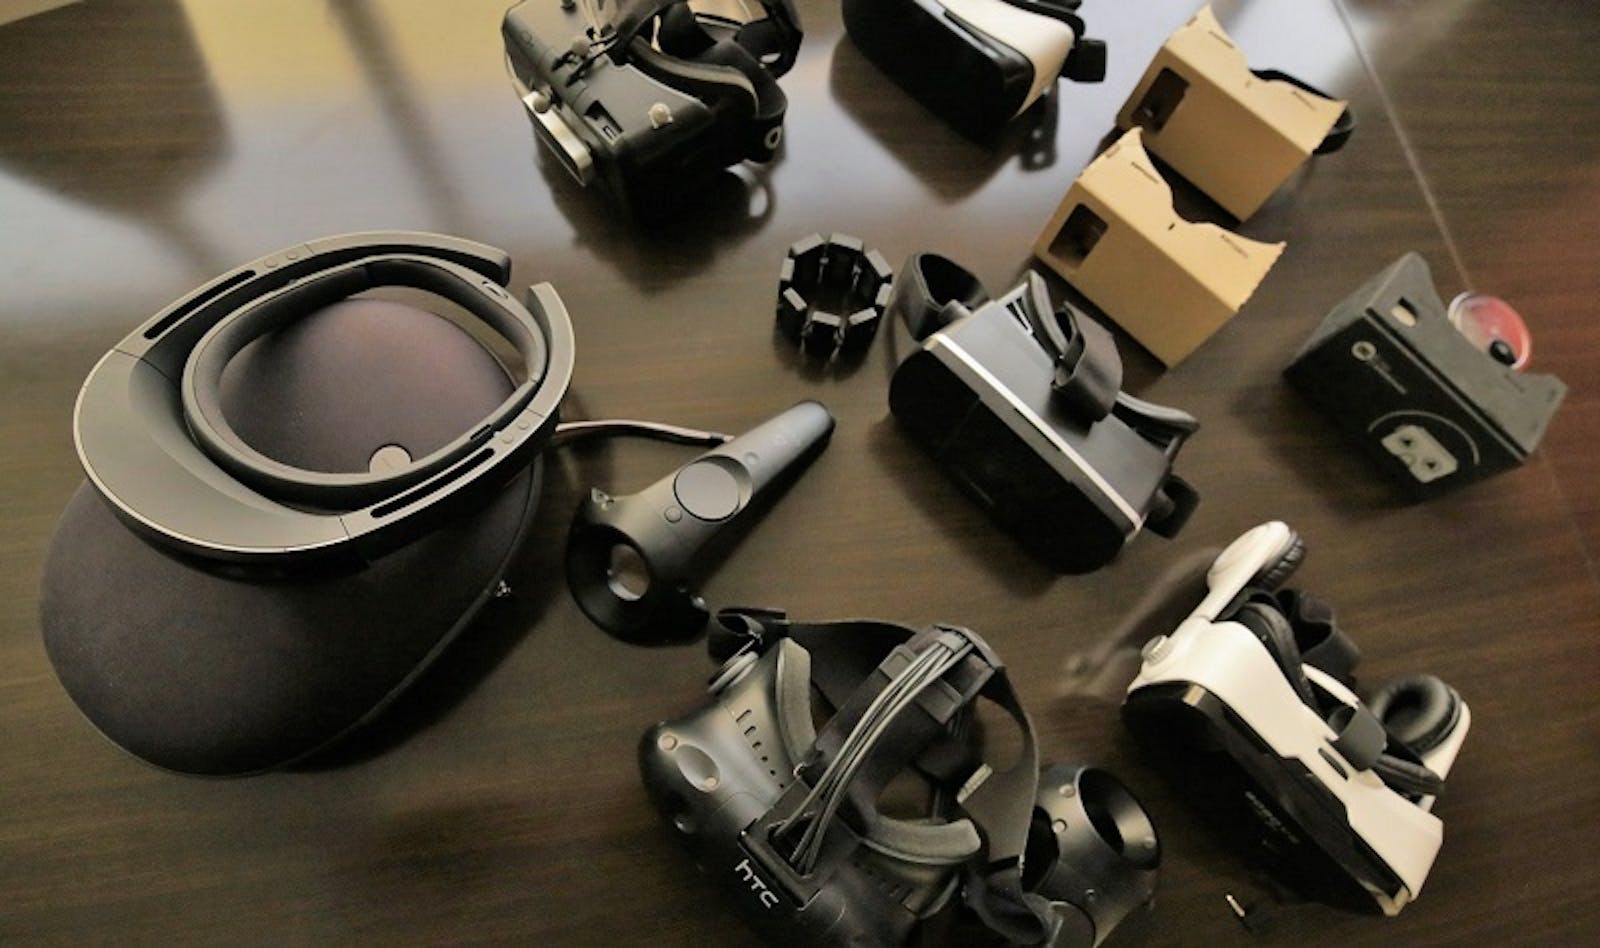 VR devices arrived at the office and we love it